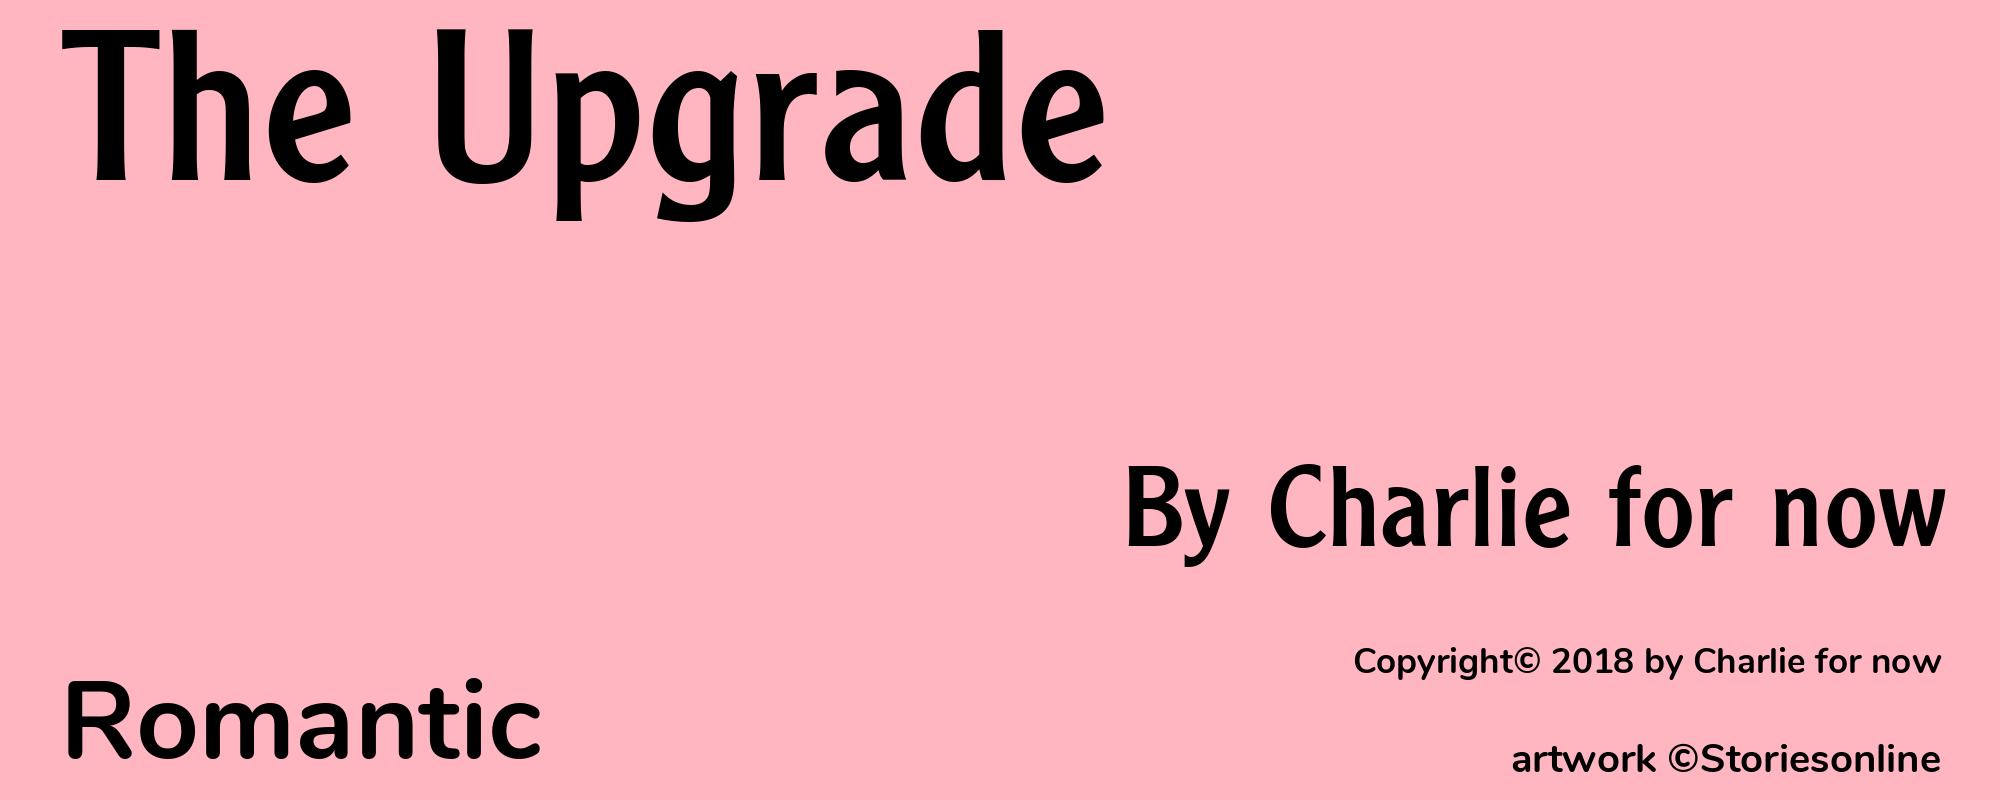 The Upgrade - Cover